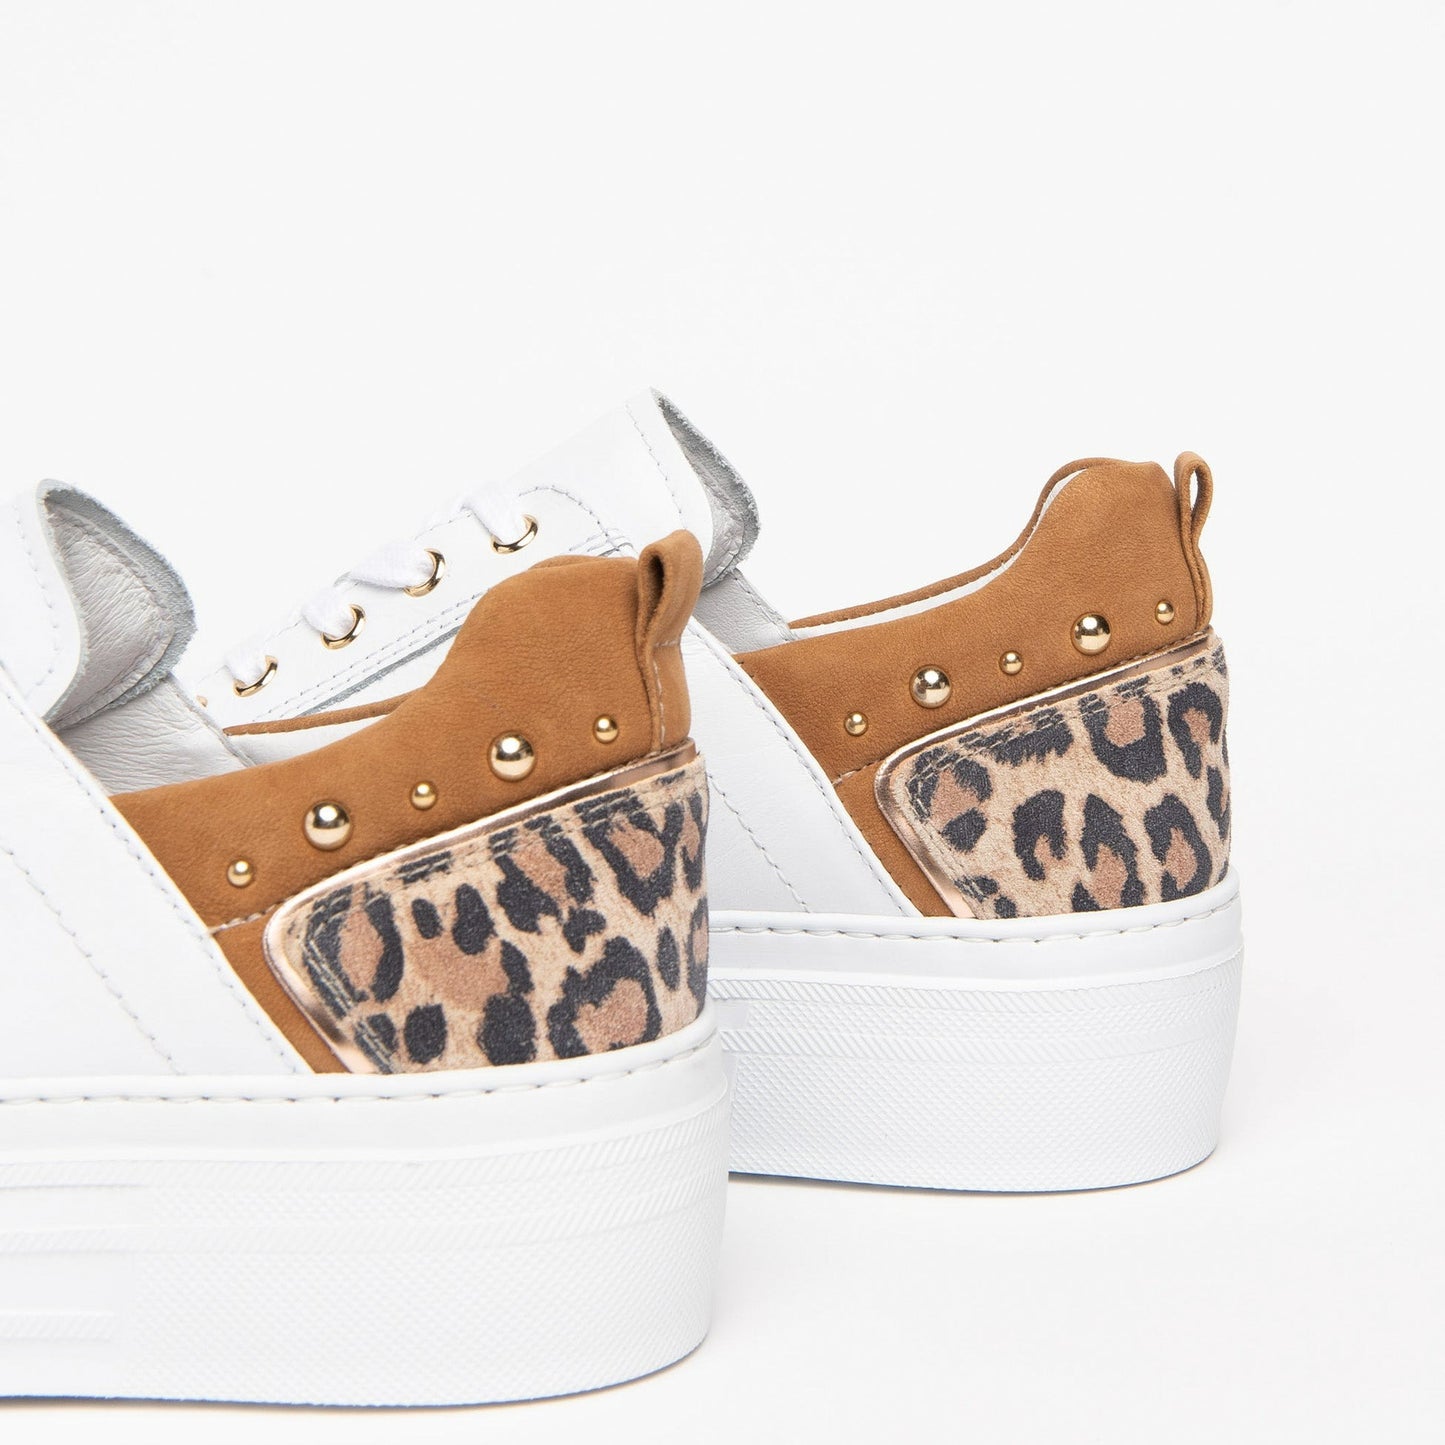 Sneakers NeroGiardini woman white leather and suede animalier